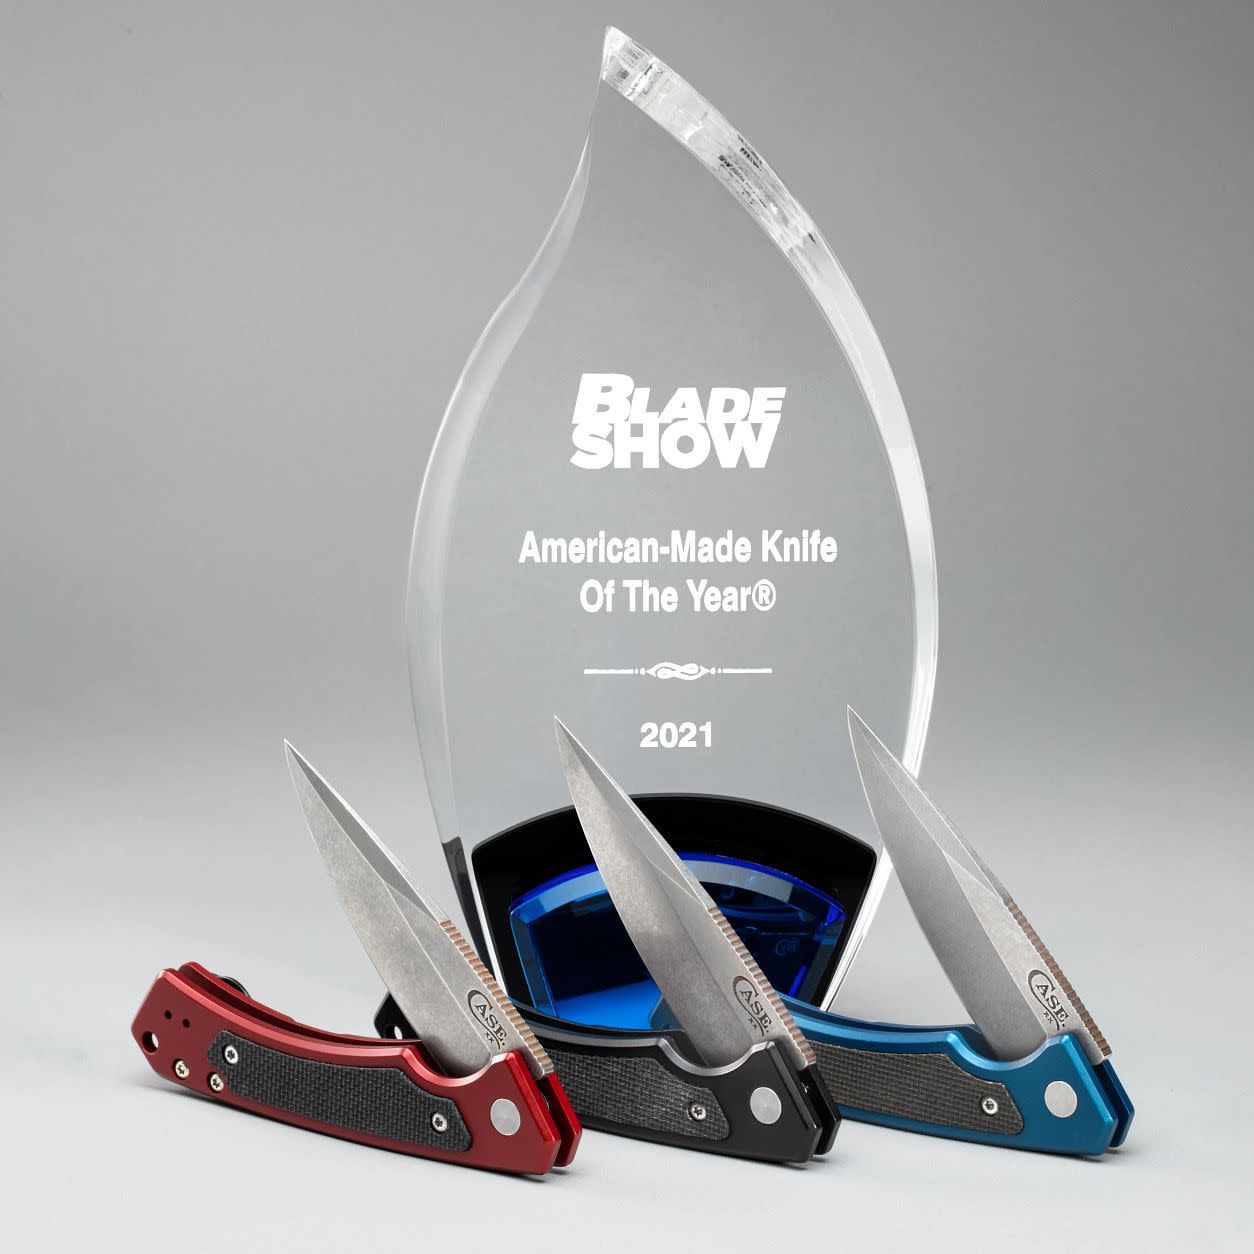 Blue Anodized Aluminum G-10 Marilla® Knife in front of the Blade Show American-Made Knife of the Year Award